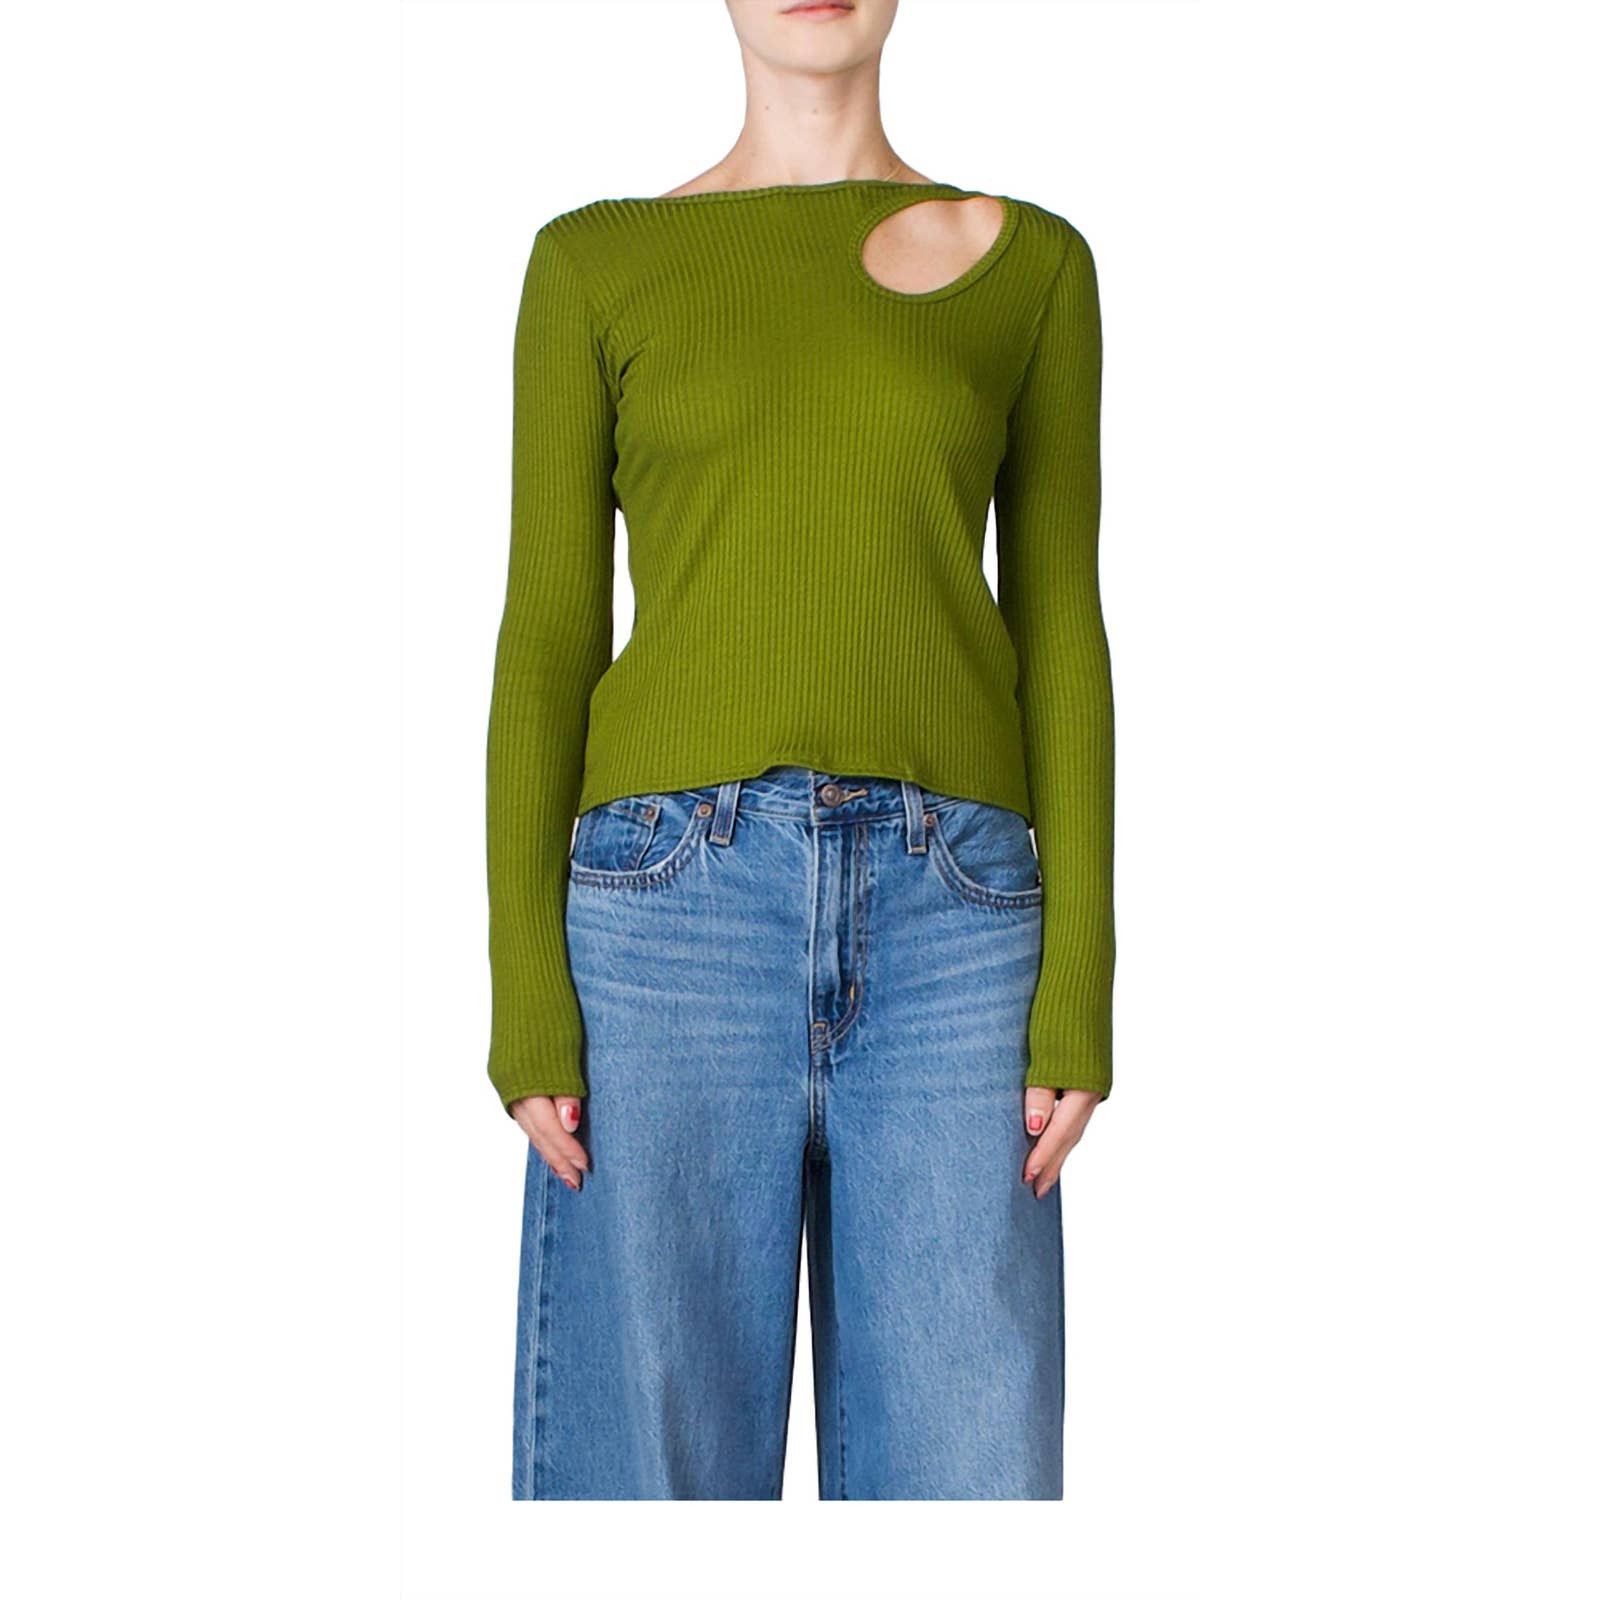 Simon Miller Space Top In Earth Green | Grailed